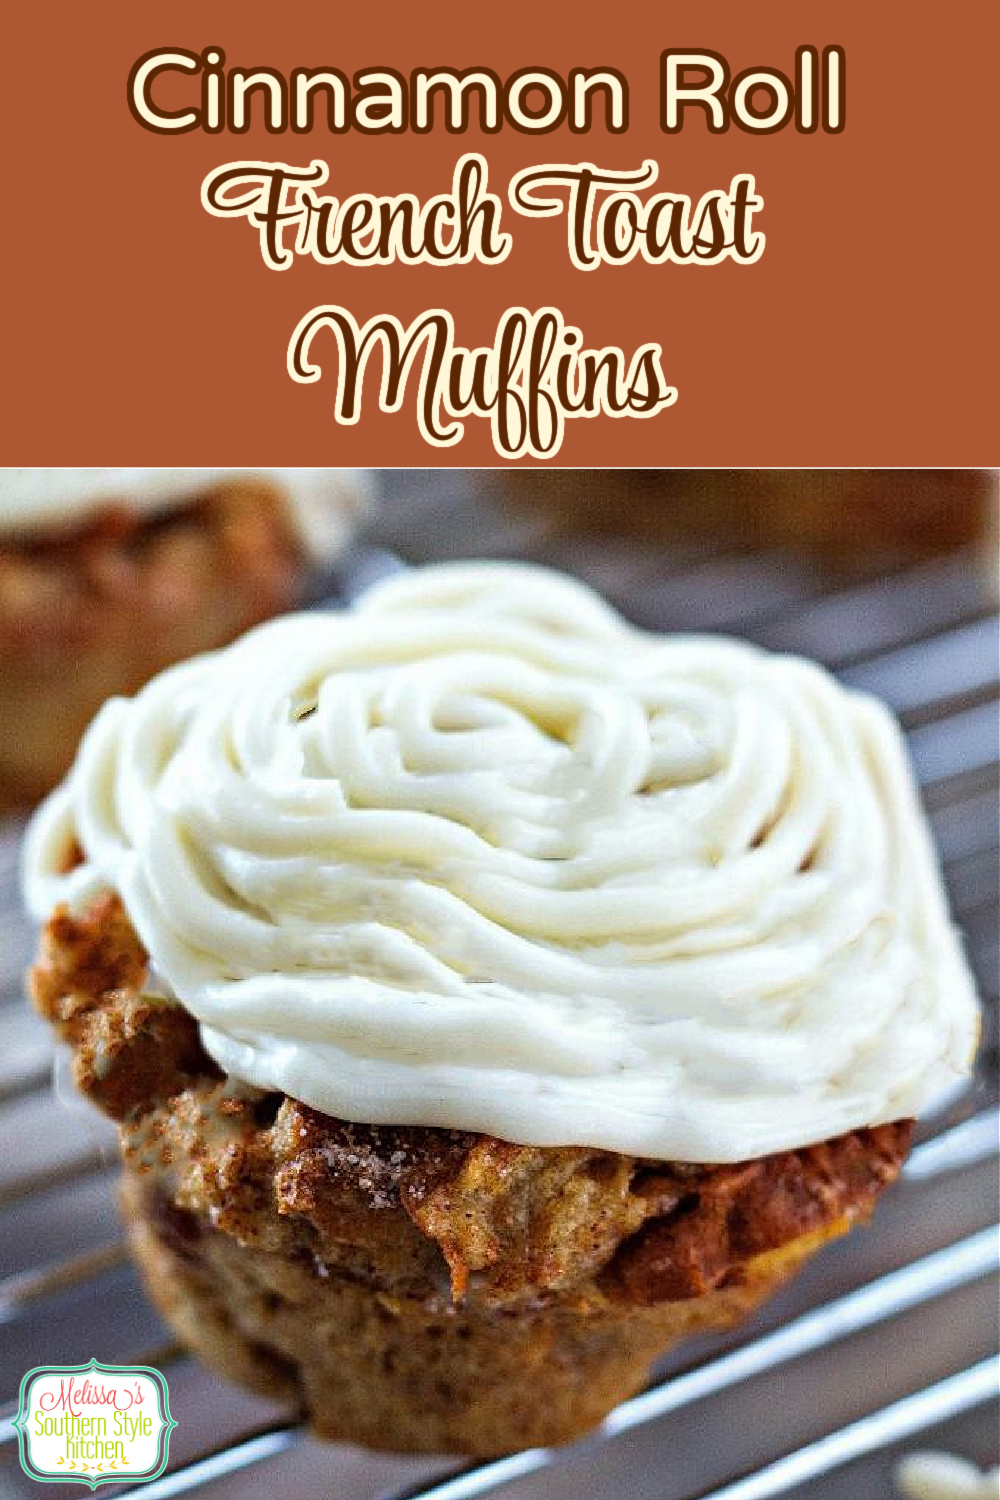 These single serving French Toast Muffins will make a delicious addition to your brunch menu #frenchtoast #cinnamonrolls #cinnamonmuffins #cinnamonrollfrenchtoast #cinnamon #muffinrecipes #brunch #breakfast #holidaybrunch #muffinpanrecipes